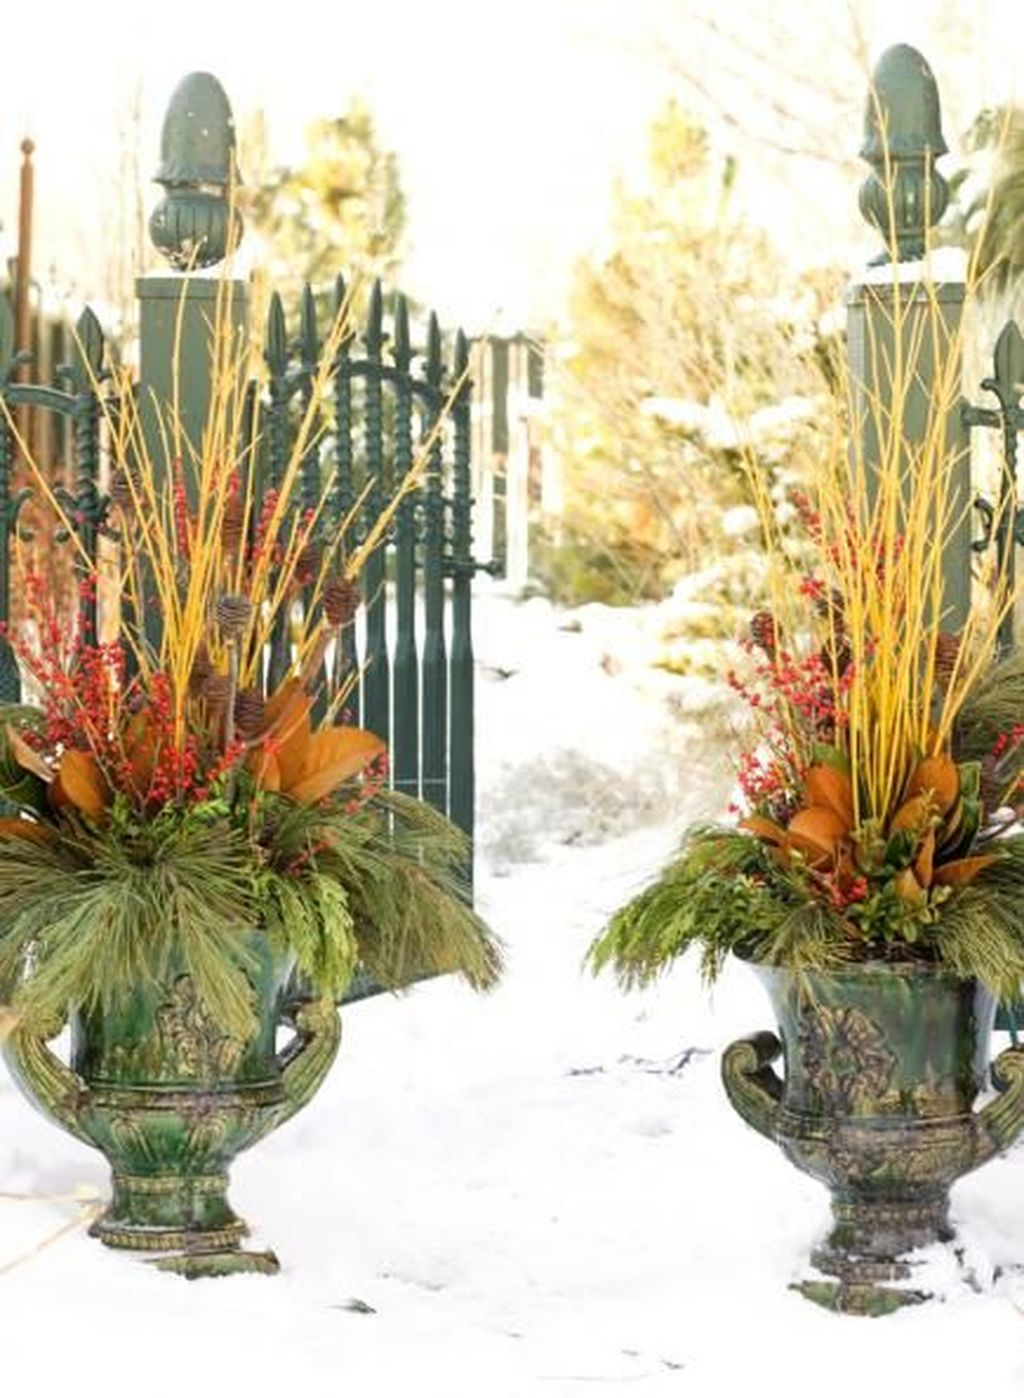 Marvelous Outdoor Holiday Planter Ideas To Beauty Porch Décor 14